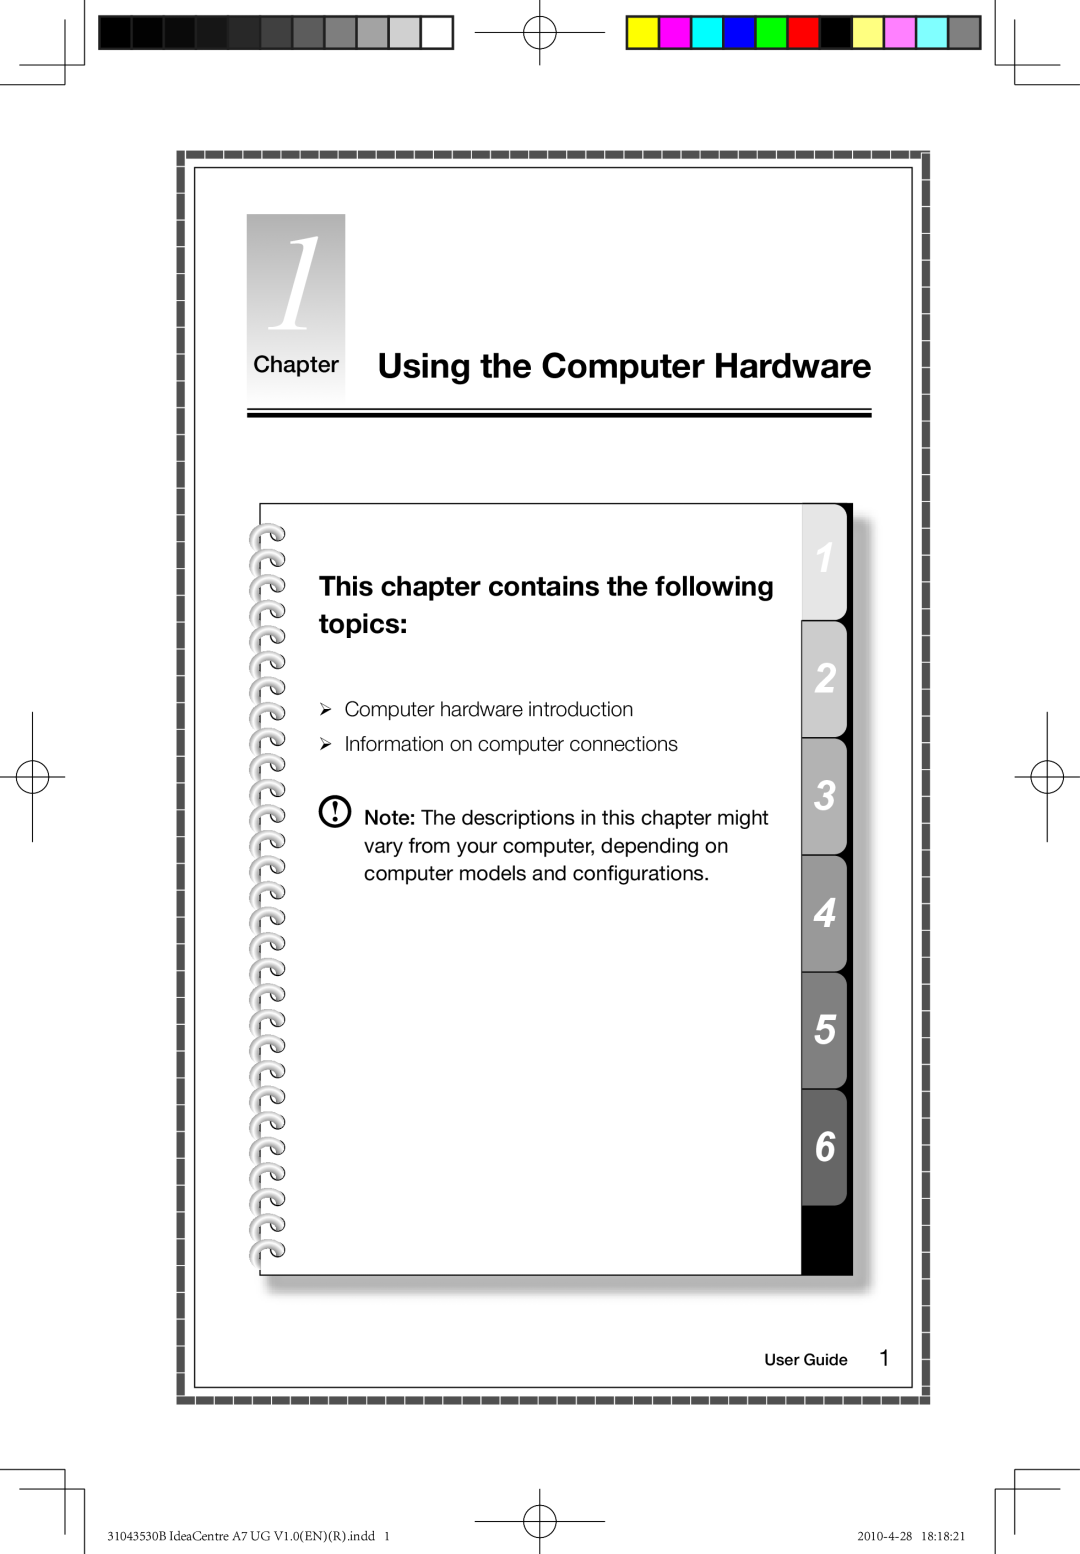 Lenovo A7 manual Chapter Using the Computer Hardware, This chapter contains the following topics, User Guide, 2010-4-28 